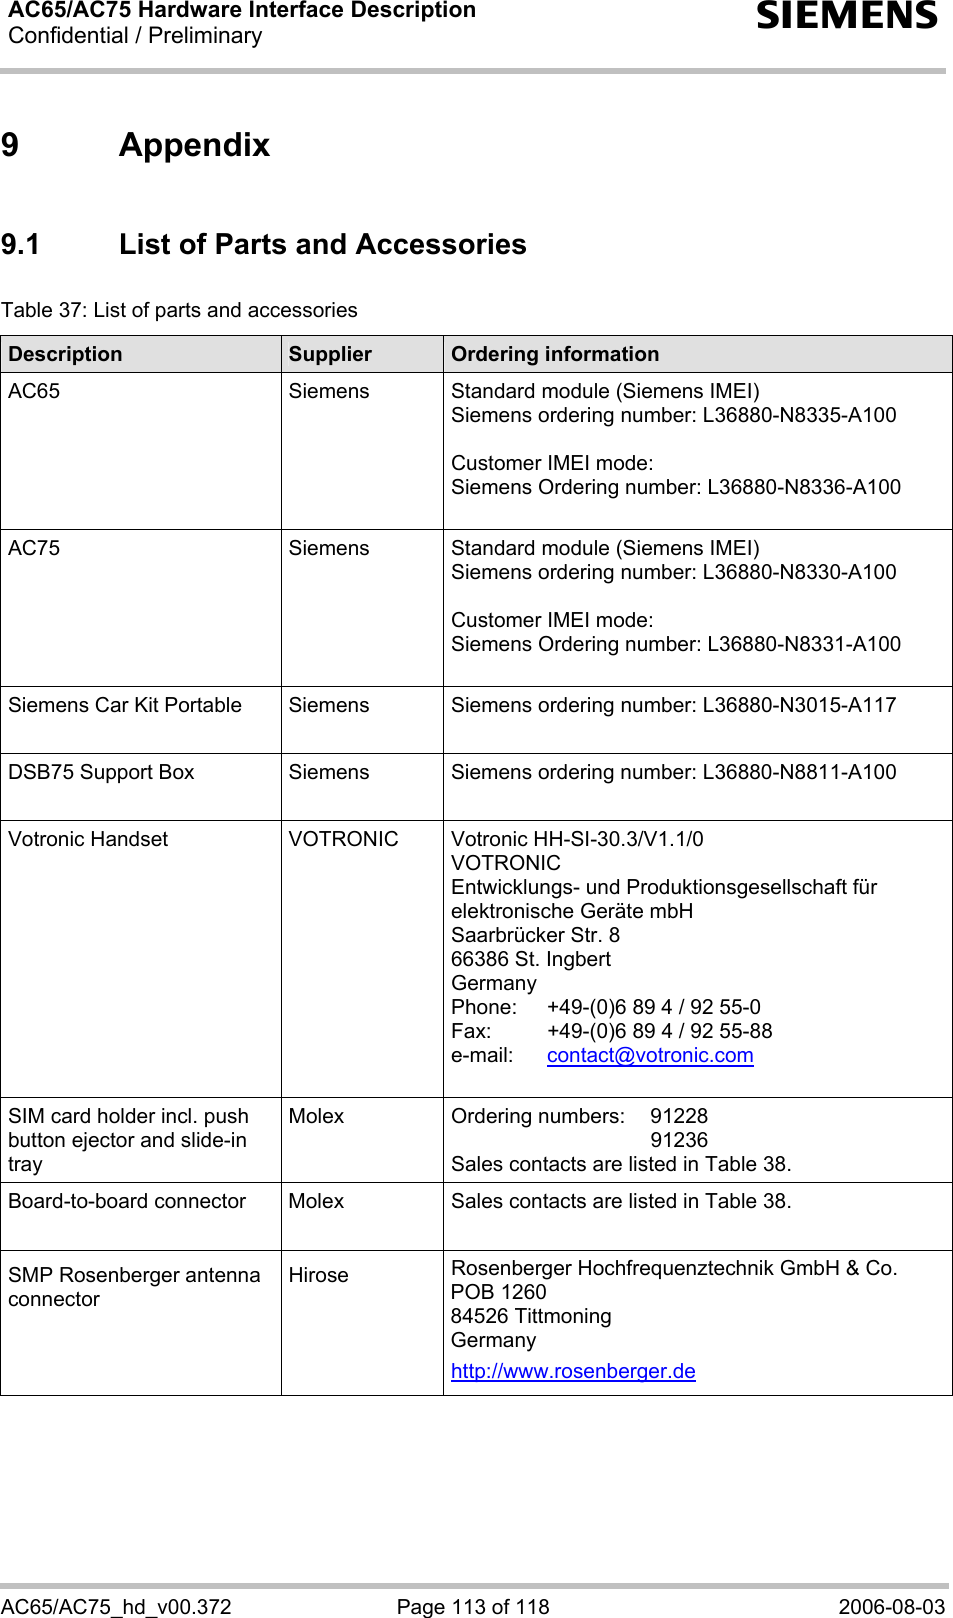 AC65/AC75 Hardware Interface Description Confidential / Preliminary  s AC65/AC75_hd_v00.372  Page 113 of 118  2006-08-03 9 Appendix 9.1  List of Parts and Accessories Table 37: List of parts and accessories Description  Supplier  Ordering information AC65  Siemens  Standard module (Siemens IMEI) Siemens ordering number: L36880-N8335-A100  Customer IMEI mode: Siemens Ordering number: L36880-N8336-A100  AC75  Siemens  Standard module (Siemens IMEI) Siemens ordering number: L36880-N8330-A100  Customer IMEI mode: Siemens Ordering number: L36880-N8331-A100  Siemens Car Kit Portable  Siemens  Siemens ordering number: L36880-N3015-A117 DSB75 Support Box  Siemens  Siemens ordering number: L36880-N8811-A100 Votronic Handset  VOTRONIC  Votronic HH-SI-30.3/V1.1/0 VOTRONIC  Entwicklungs- und Produktionsgesellschaft für elektronische Geräte mbH Saarbrücker Str. 8 66386 St. Ingbert Germany Phone:   +49-(0)6 89 4 / 92 55-0 Fax:   +49-(0)6 89 4 / 92 55-88 e-mail:   contact@votronic.com  SIM card holder incl. push button ejector and slide-in tray Molex  Ordering numbers:  91228   91236 Sales contacts are listed in Table 38. Board-to-board connector  Molex  Sales contacts are listed in Table 38. SMP Rosenberger antenna connector Hirose  Rosenberger Hochfrequenztechnik GmbH &amp; Co. POB 1260 84526 Tittmoning Germany http://www.rosenberger.de     